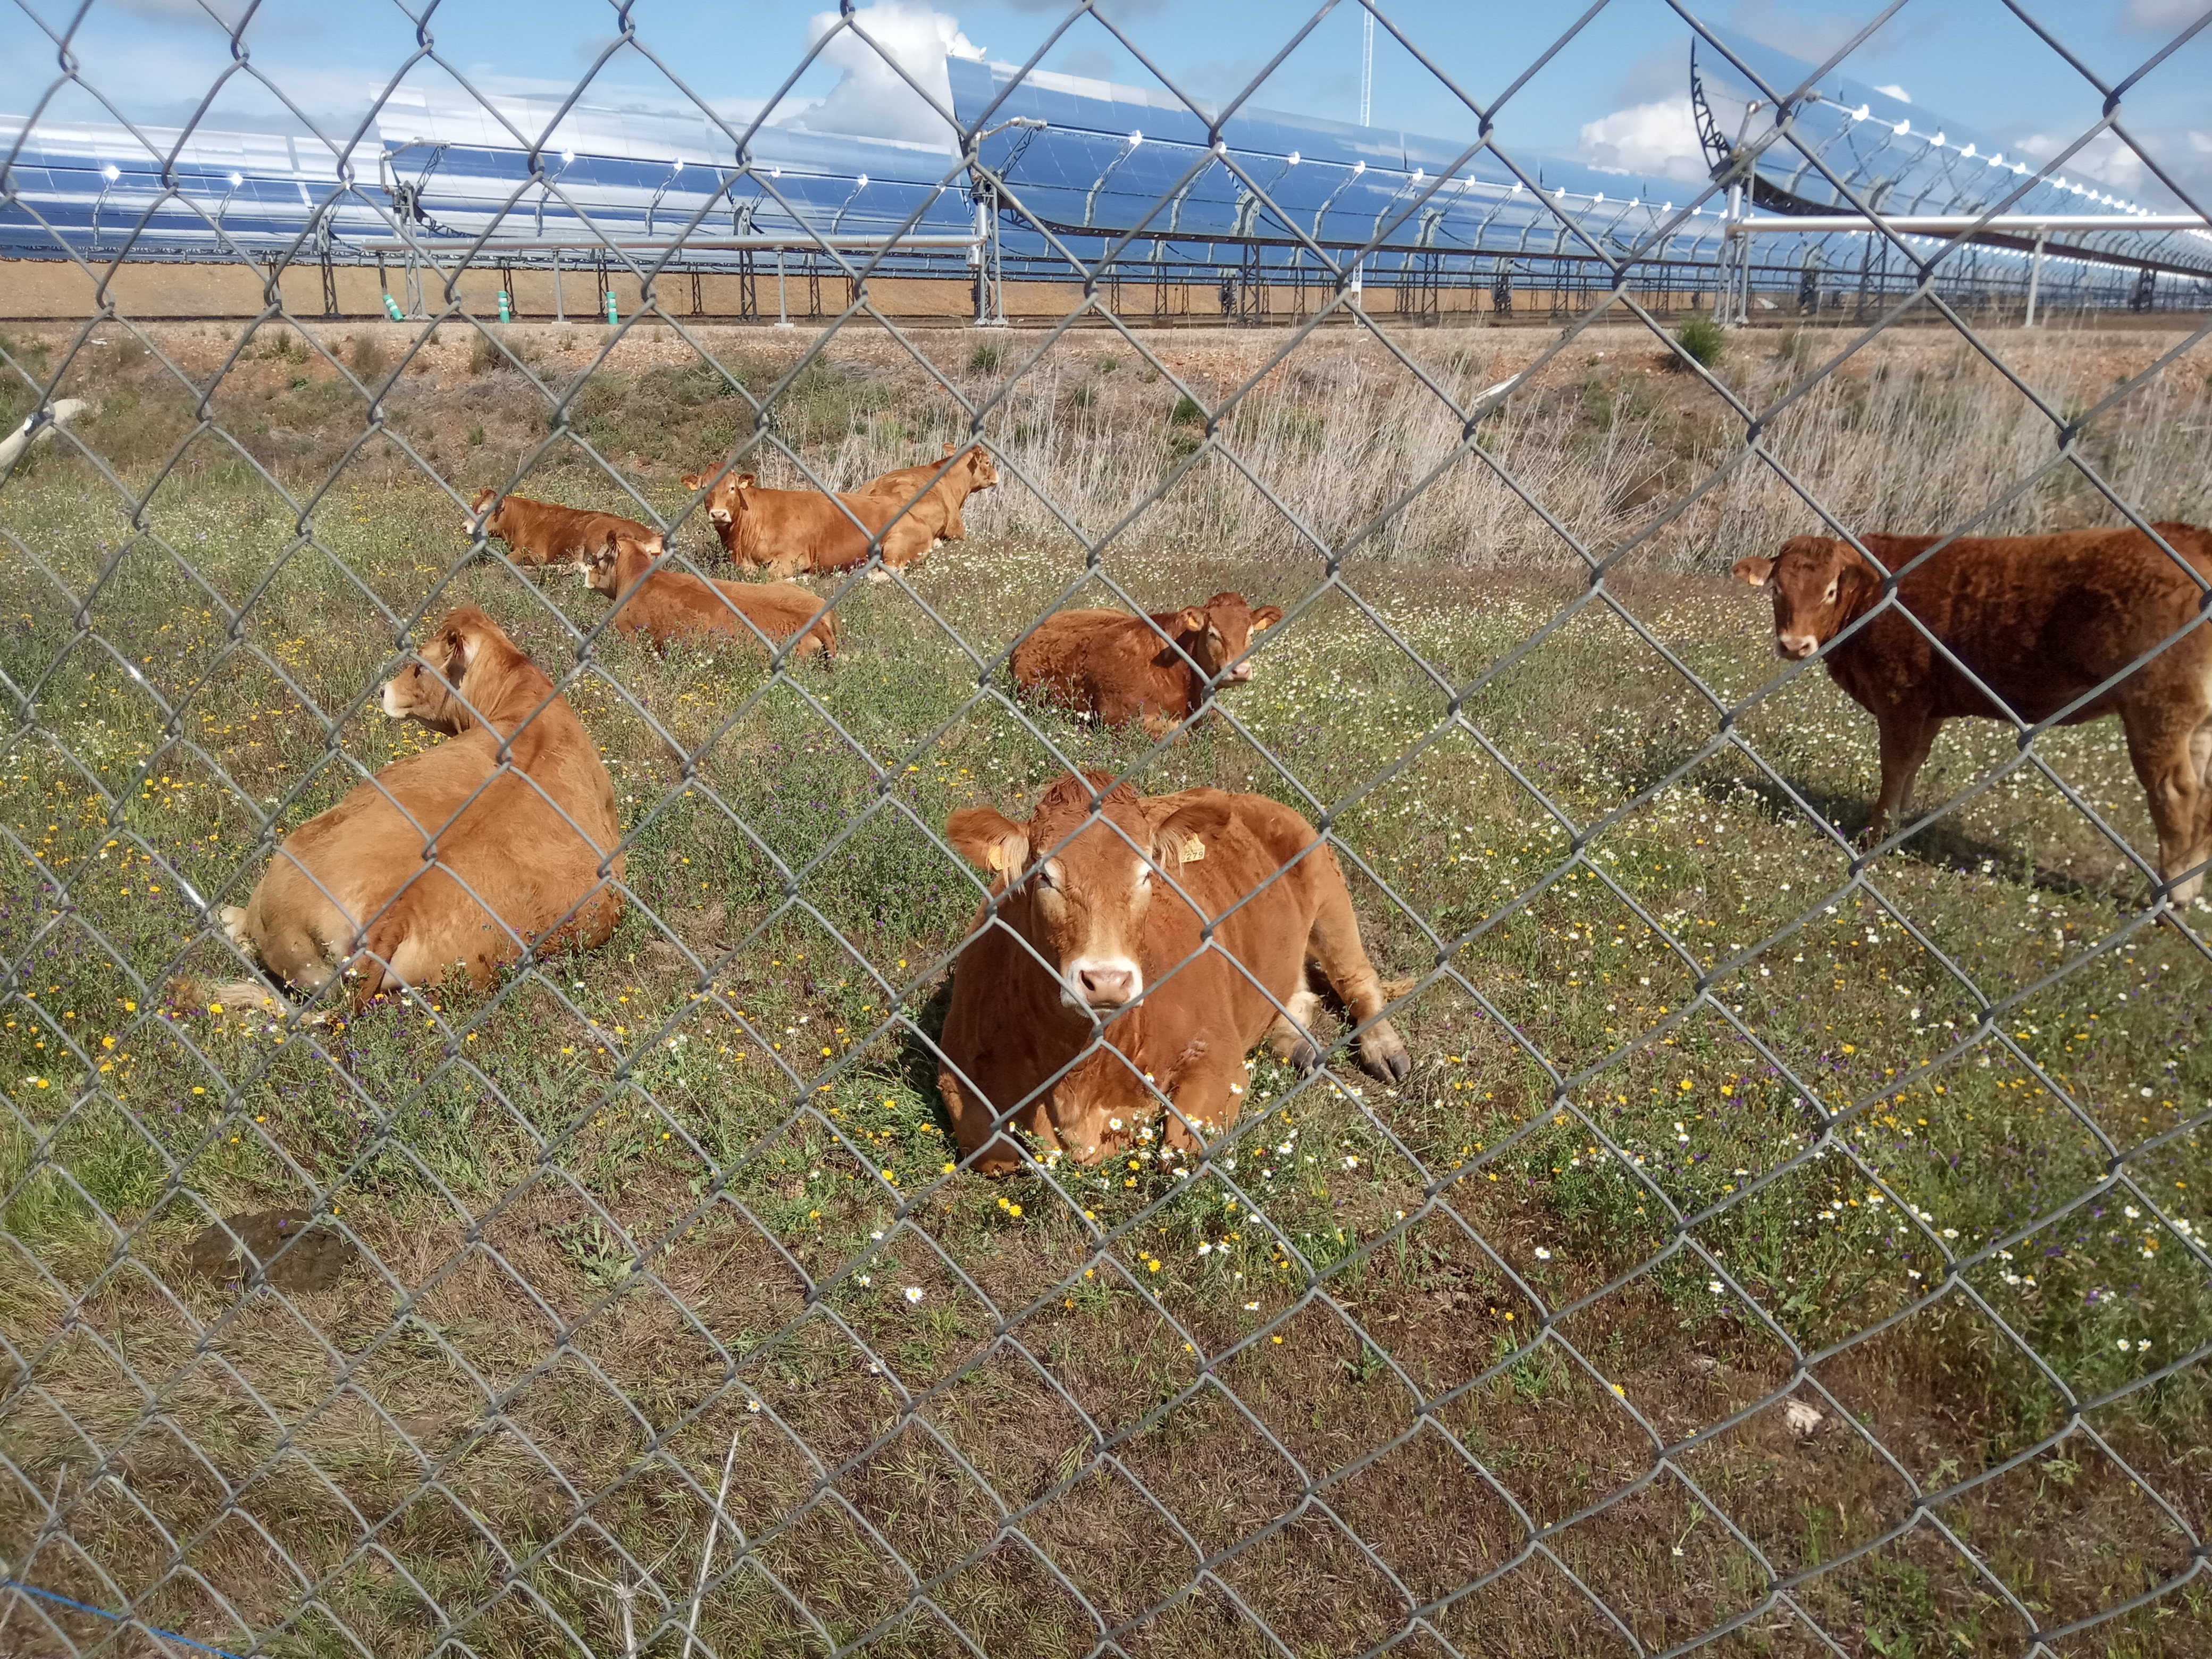 The controlling of herbaceous vegetation in the facilities of the thermosolar plant is achieved through the grazing of cattle from nearby livestock farms